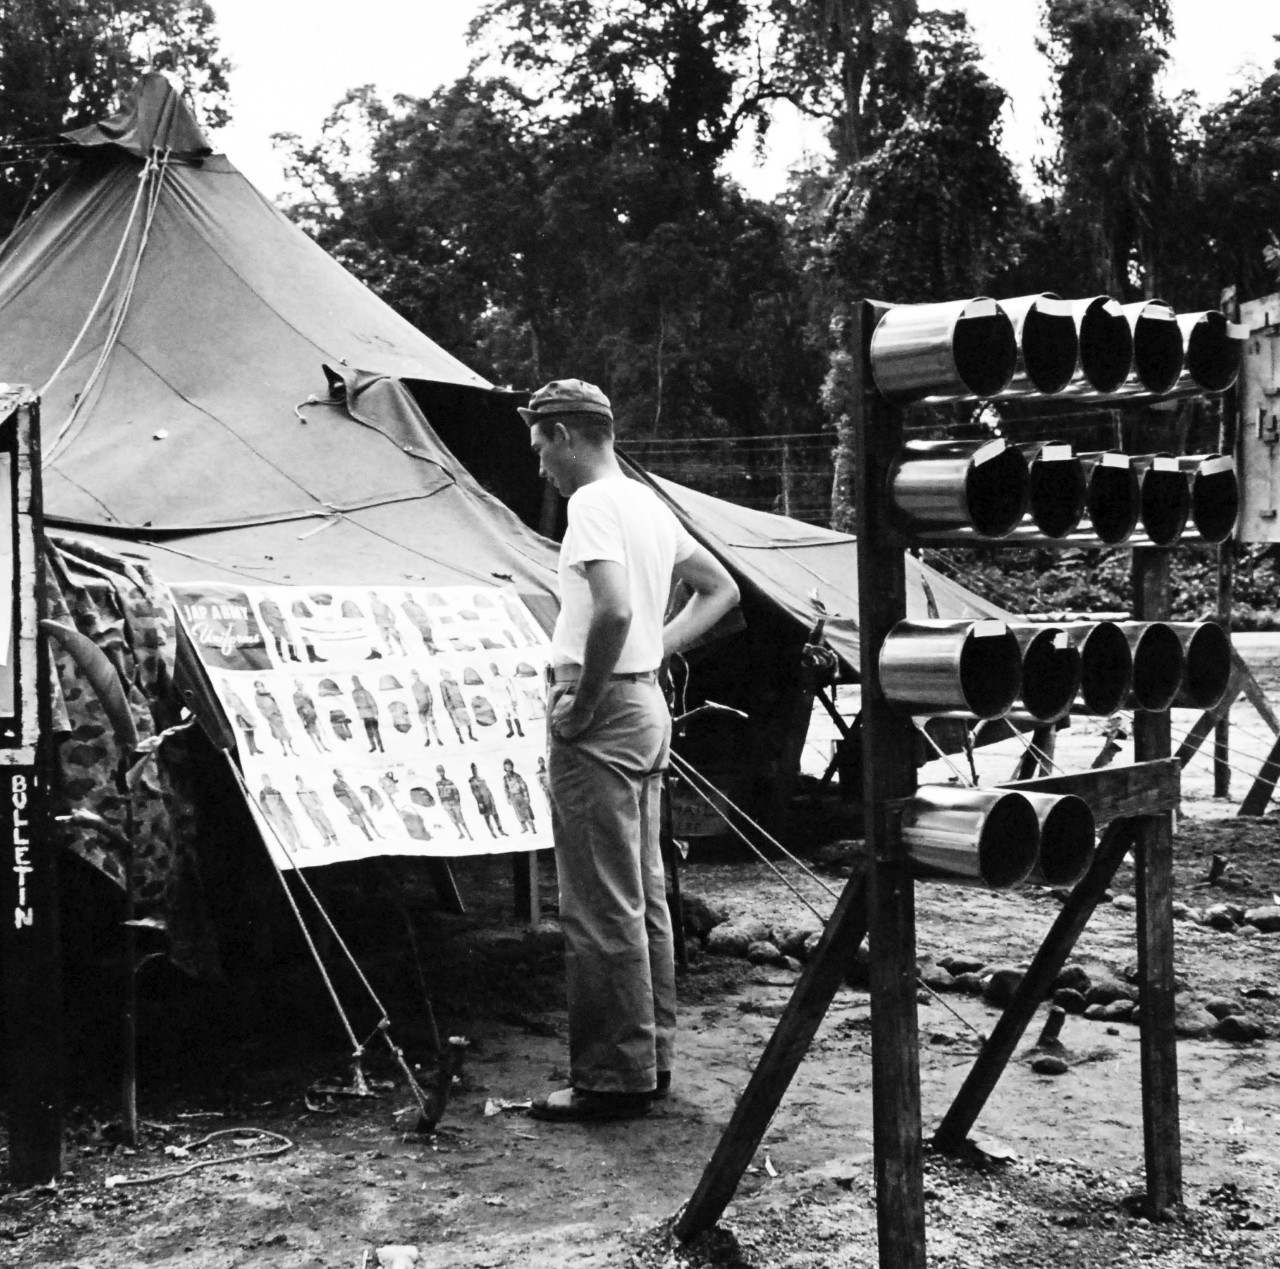 Bougainville Campaign, November 1943-August 1945.   A U.S. Marine studies the latest Japanese military fashion at Headquarters Tent on Bougainville.  The mail boxes were converted from rimmed out tin cans.  Steichen Photograph crew, TR-9566, February 1944.   Official U.S Navy Photograph, now in the collections of the National Archives.  (2017/12/13).